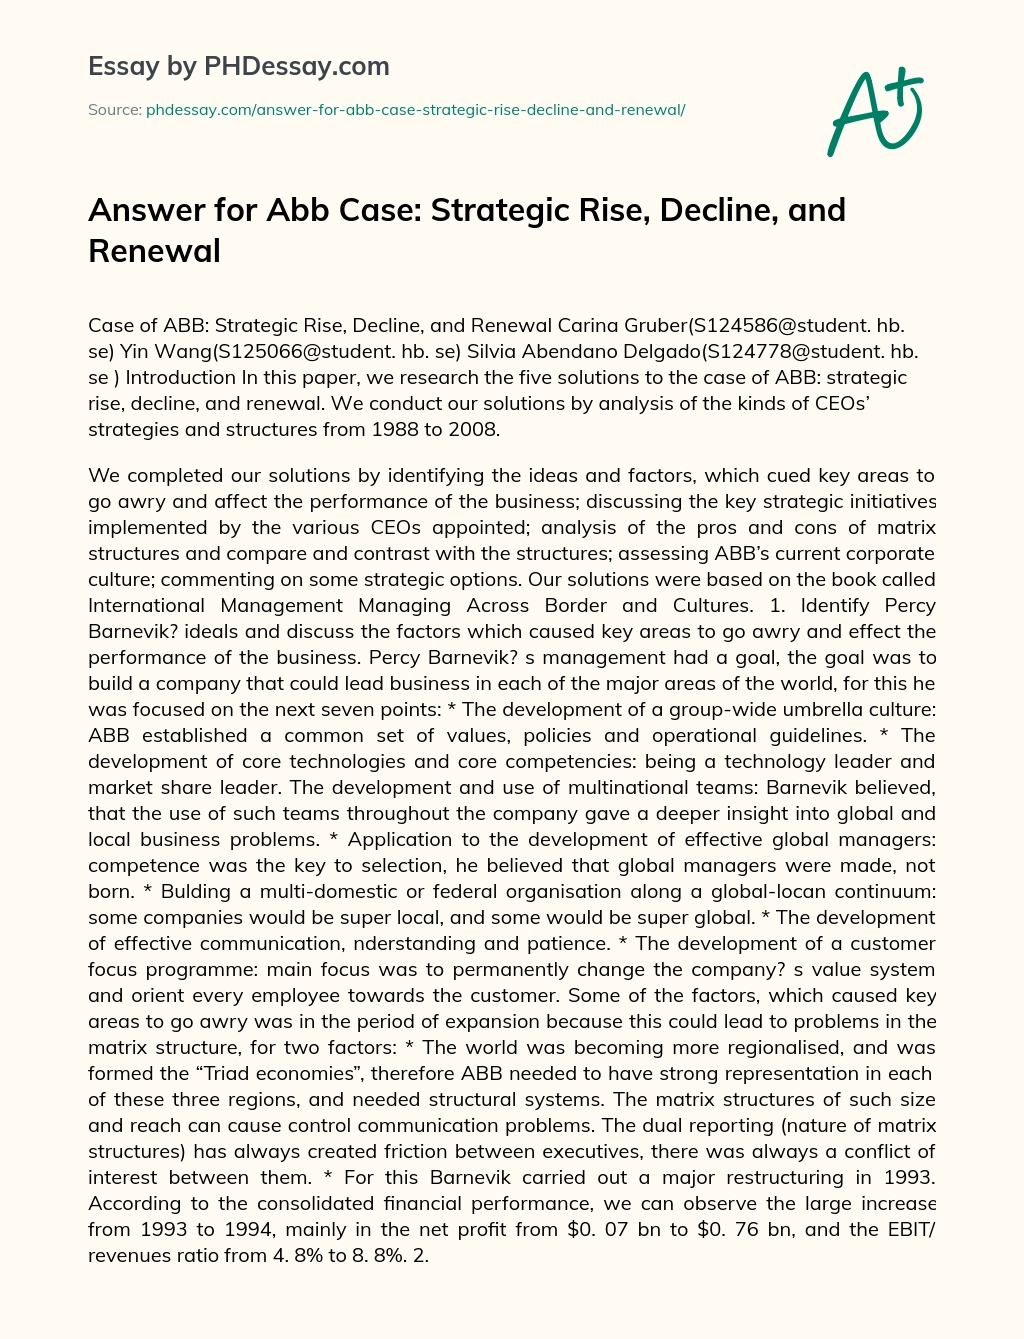 Answer for Abb Case: Strategic Rise, Decline, and Renewal essay